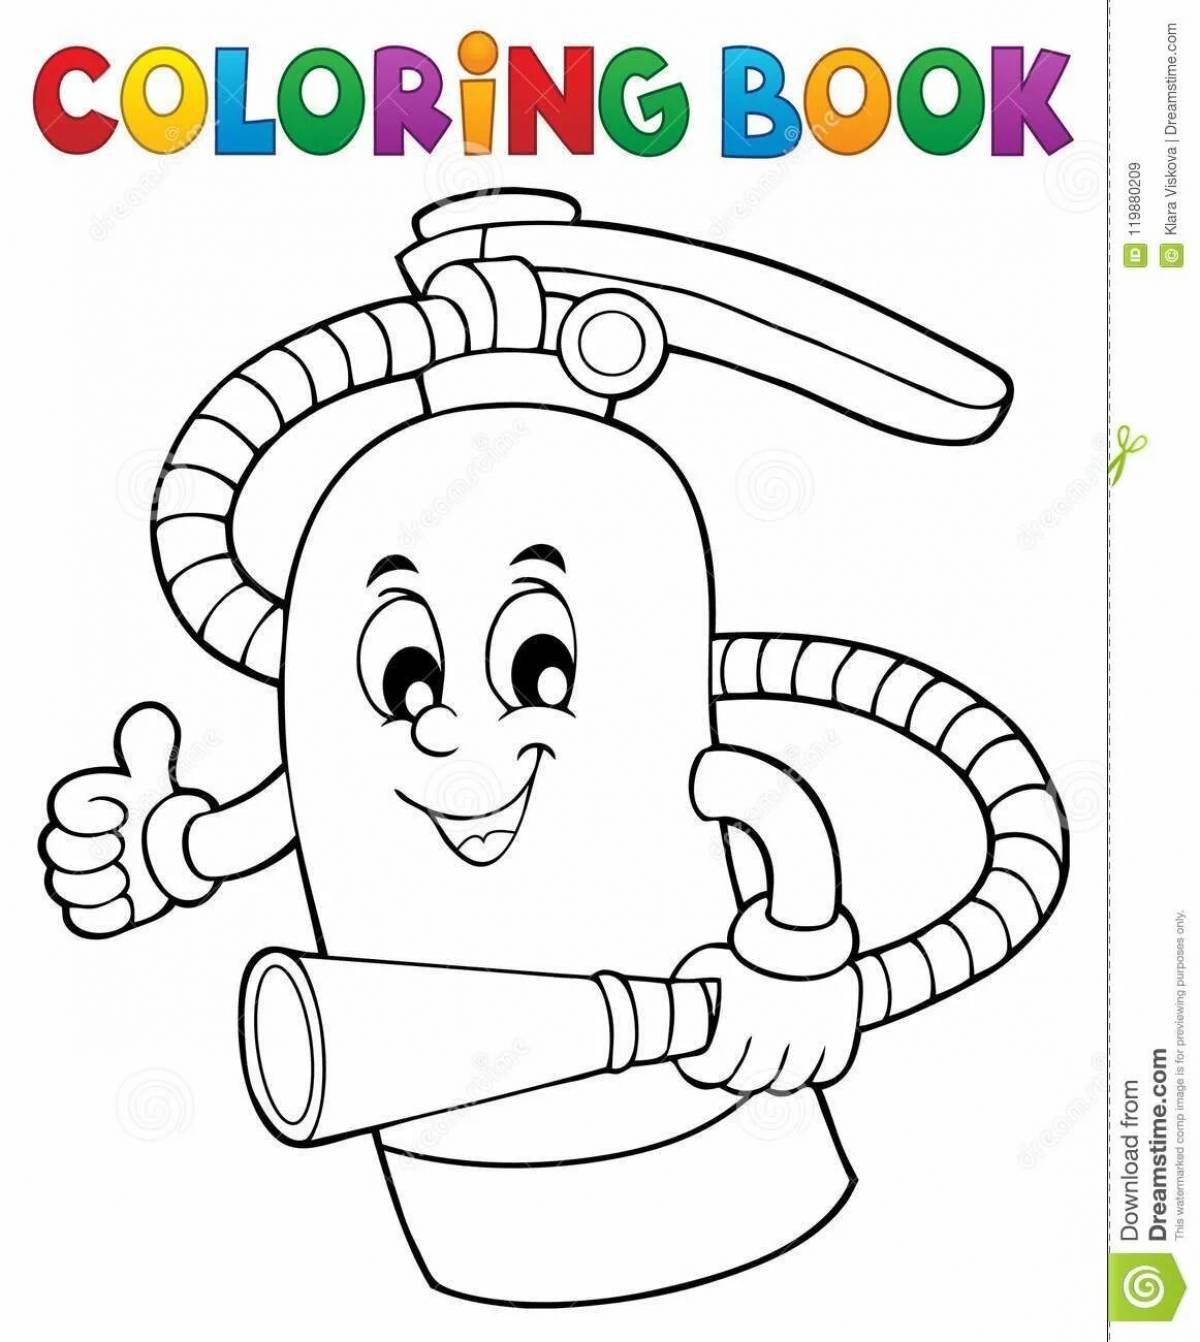 An attractive fire extinguisher coloring book for beginners